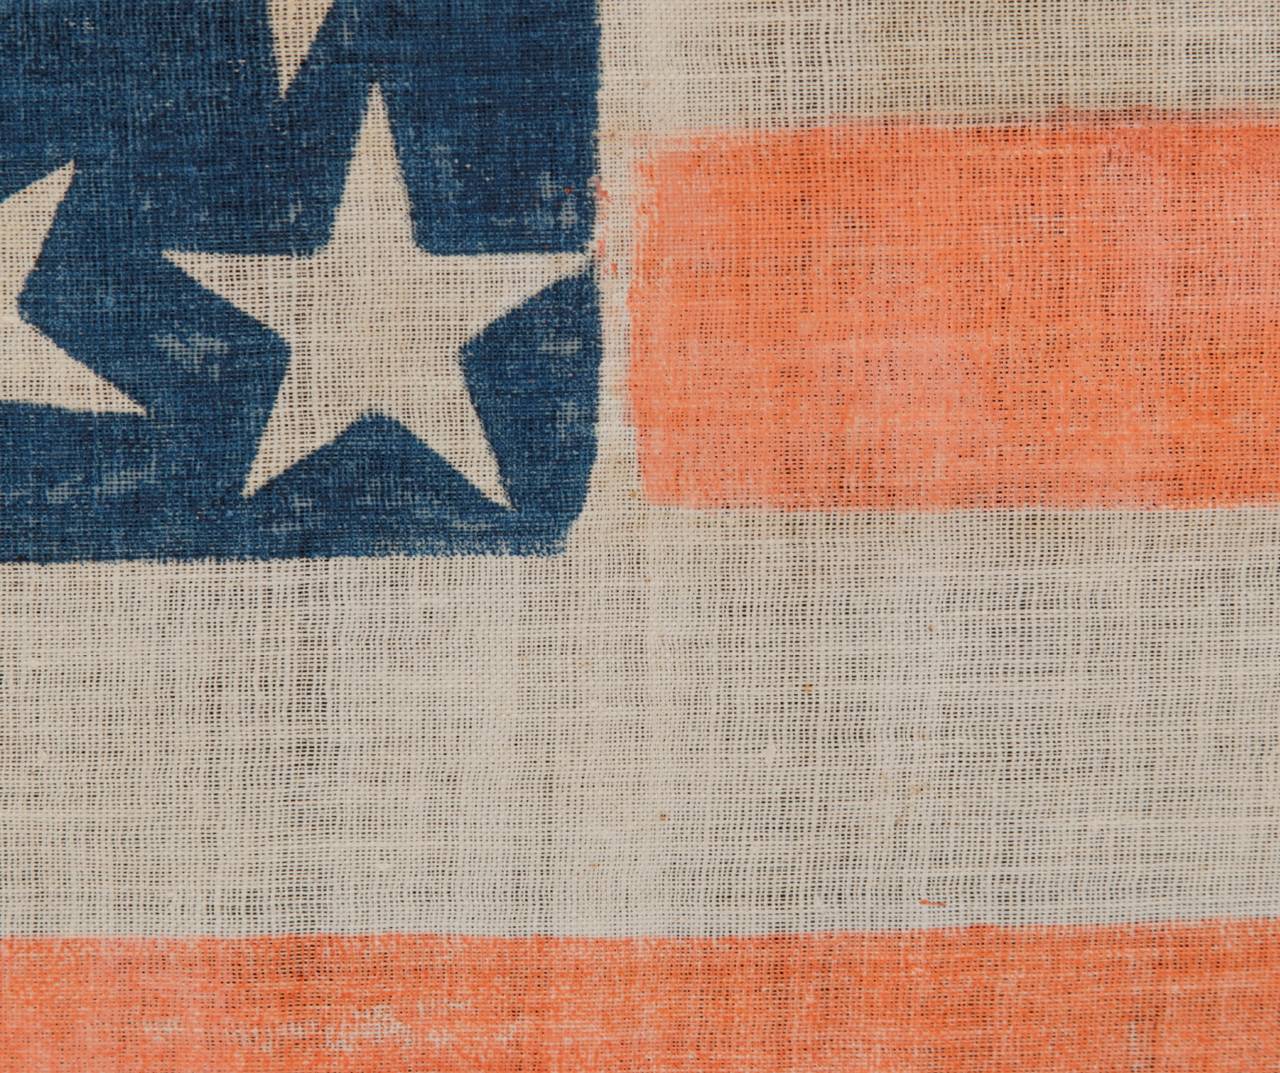 19th Century 38 Star Flag with Stars in a Scattered Pattern